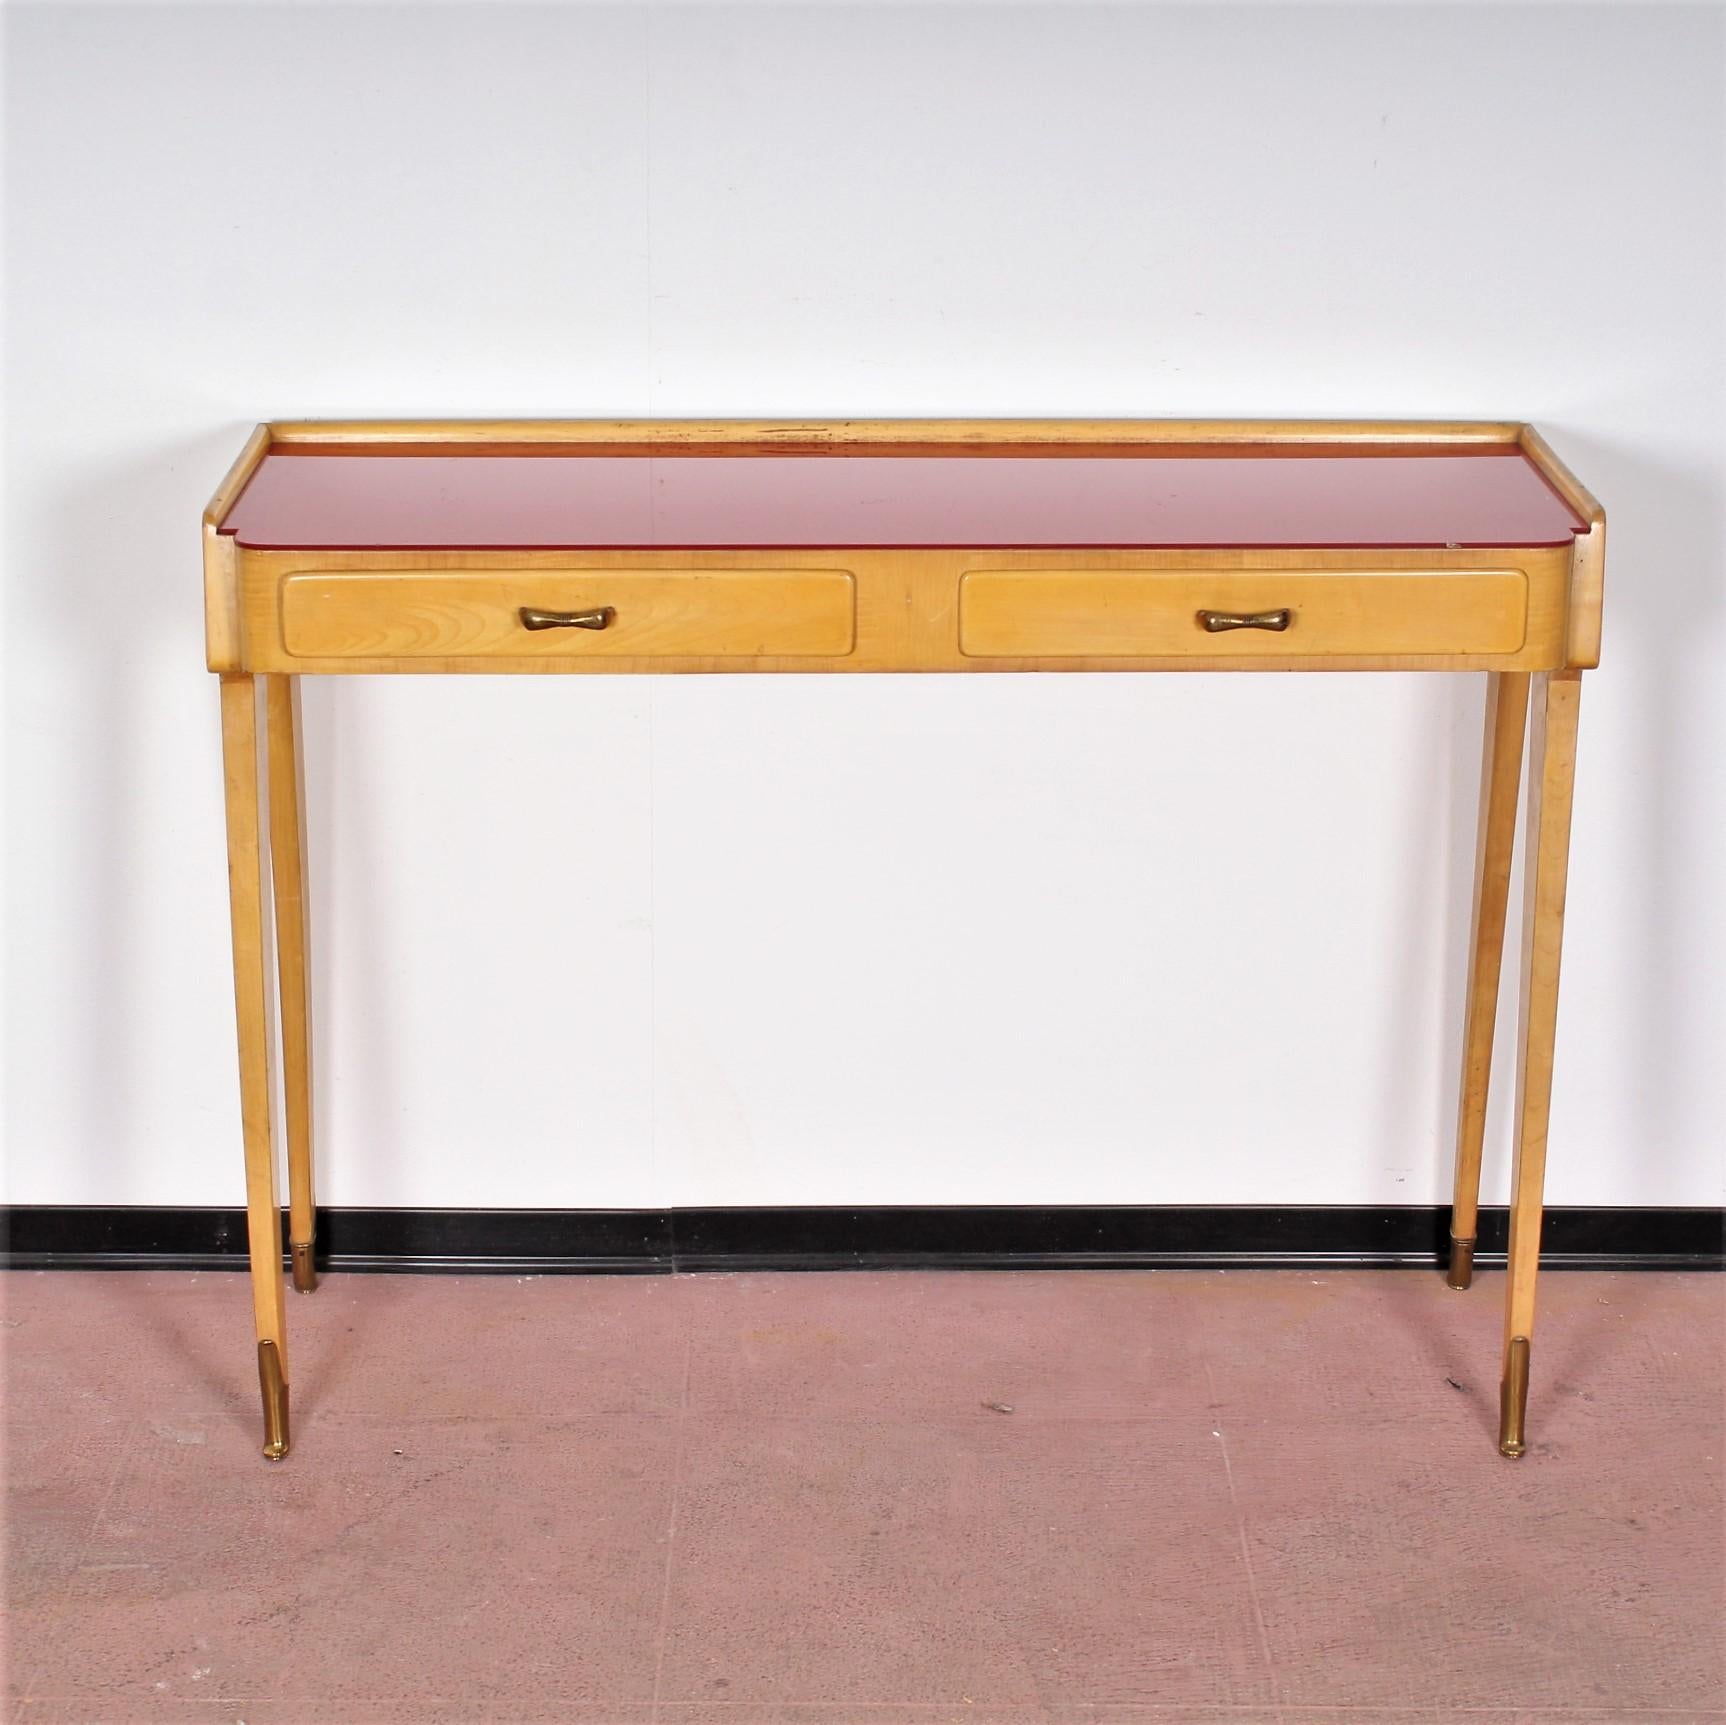 Beautiful maple wood console table with two front drawers, brass feet and red colored glass top. Ico Parisi attribuition, Cantù - Italia production of the 1950s.
Wear consistent with age and use.